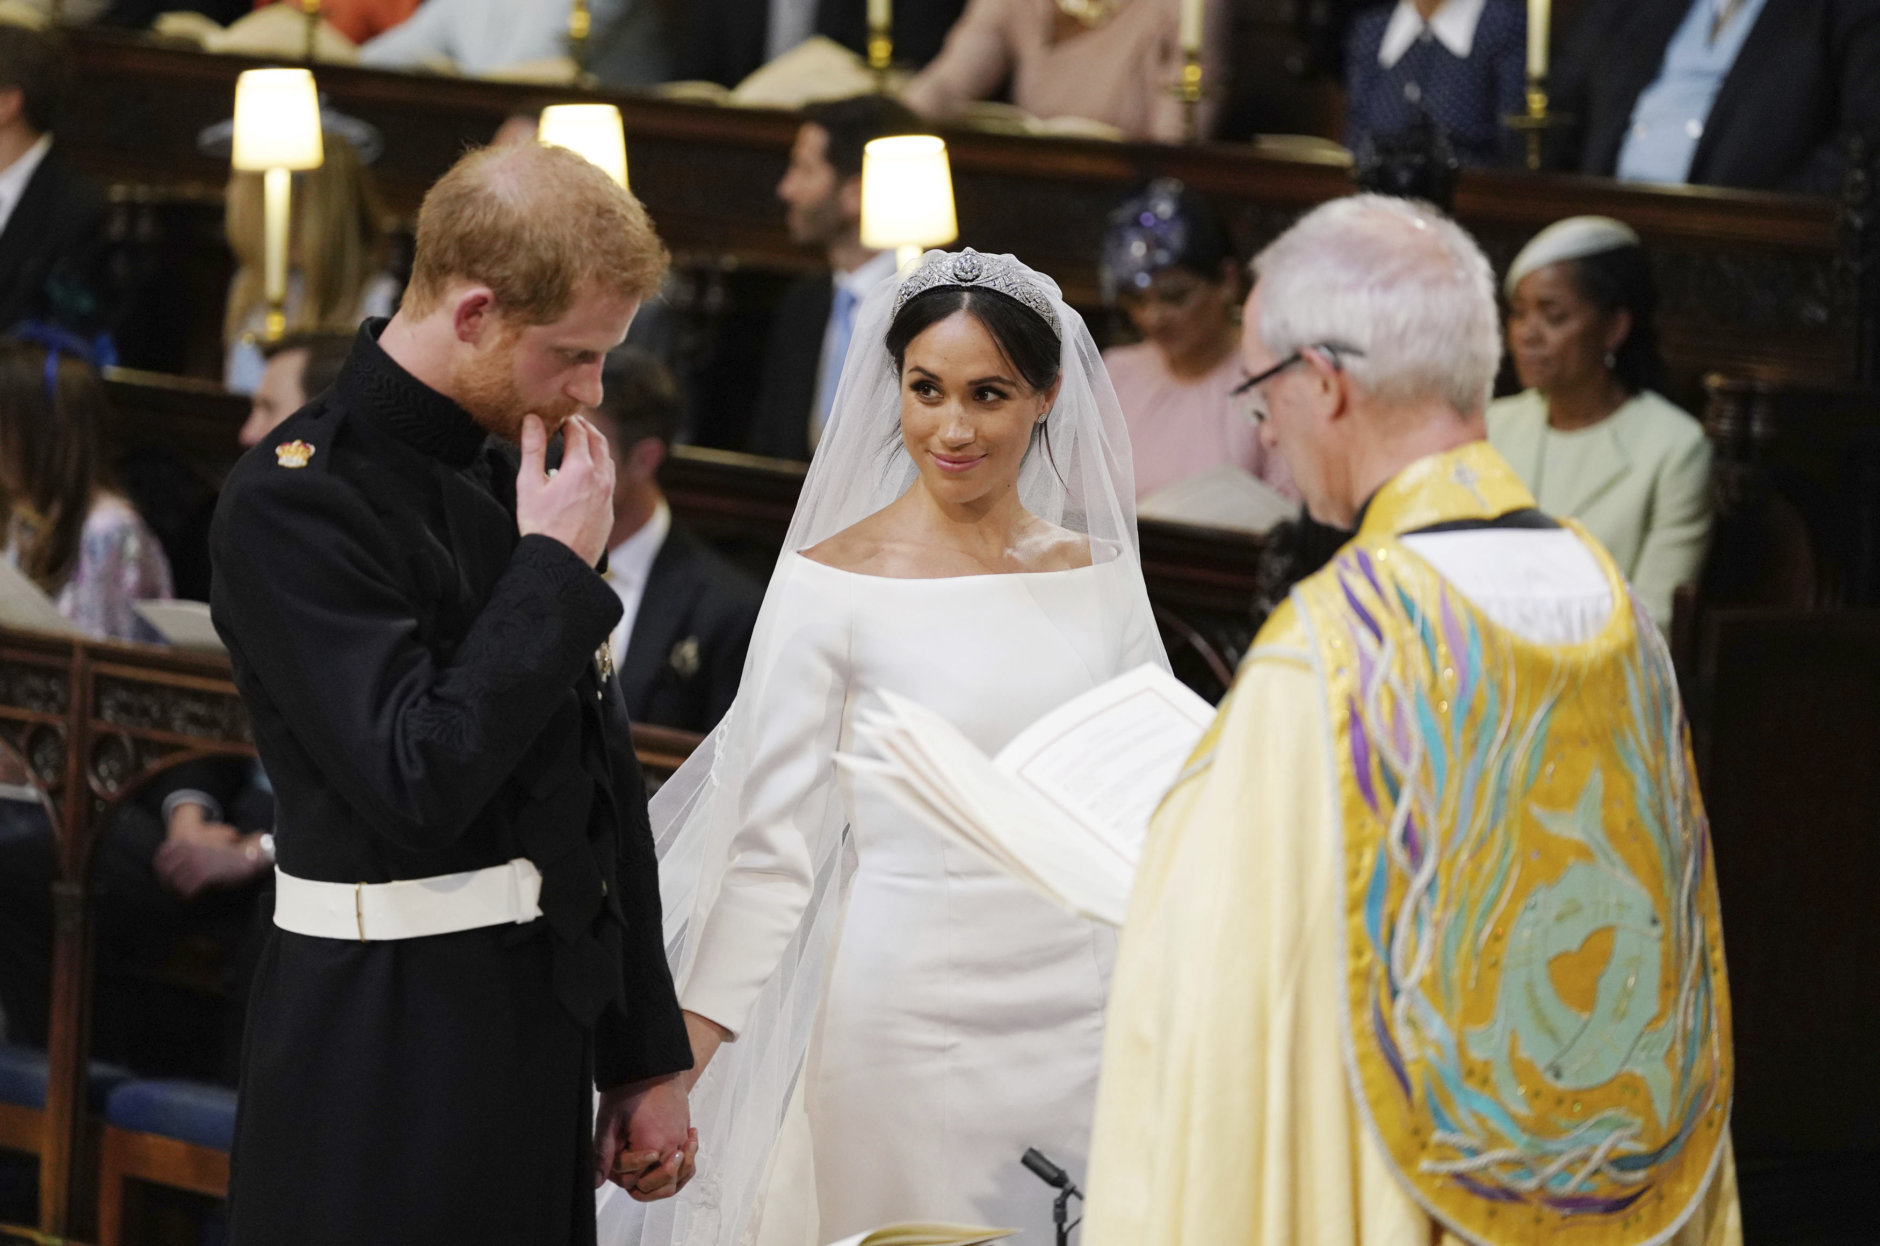 Britain's Prince Harry and Meghan Markle hold hands in St George's Chapel at Windsor Castle during their wedding service, conducted by the Archbishop of Canterbury Justin Welby in Windsor, near London, England, Saturday, May 19, 2018. (Dominic Lipinski/pool photo via AP)